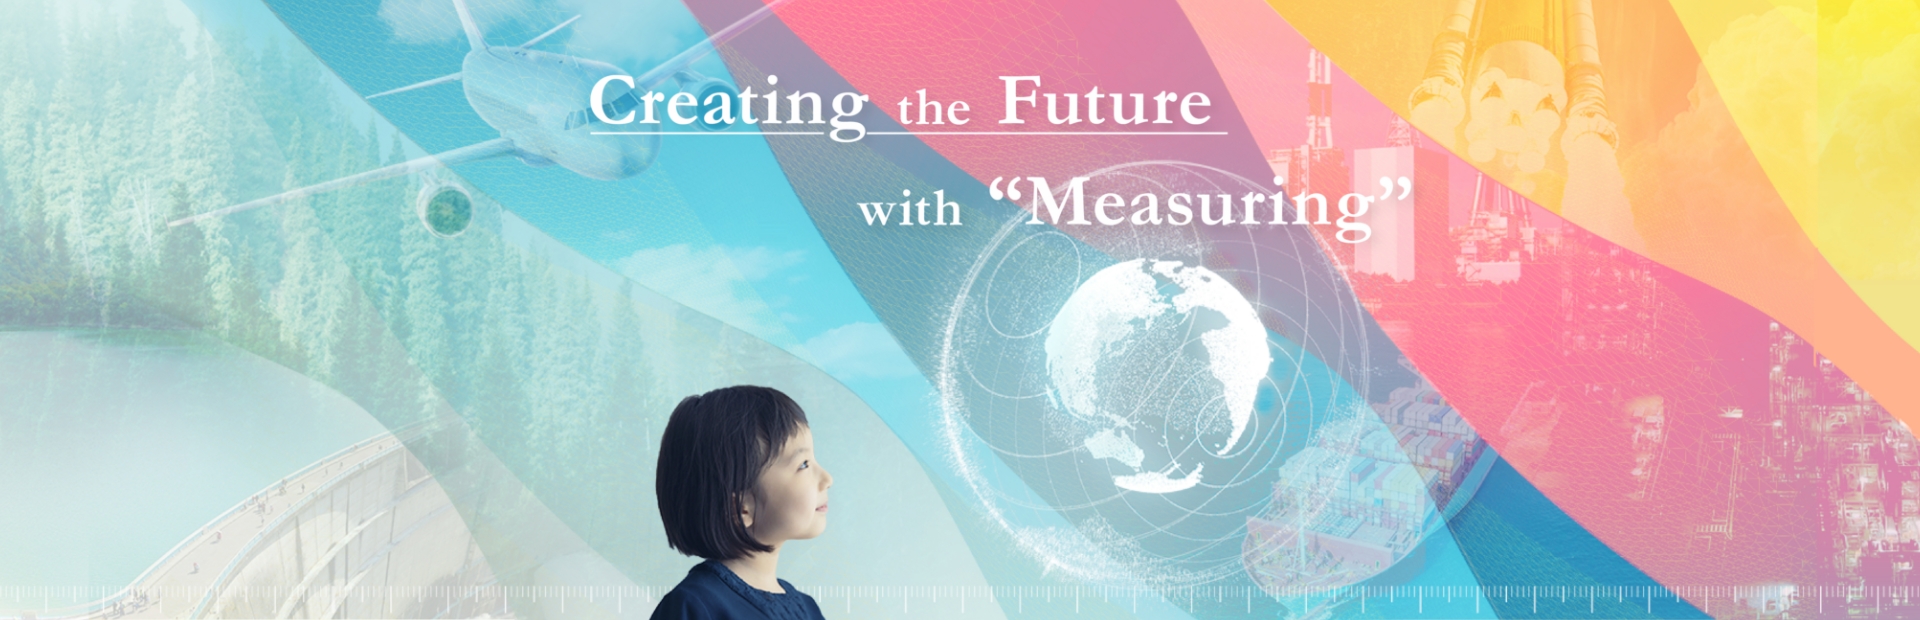 Creating the Future with Measuring